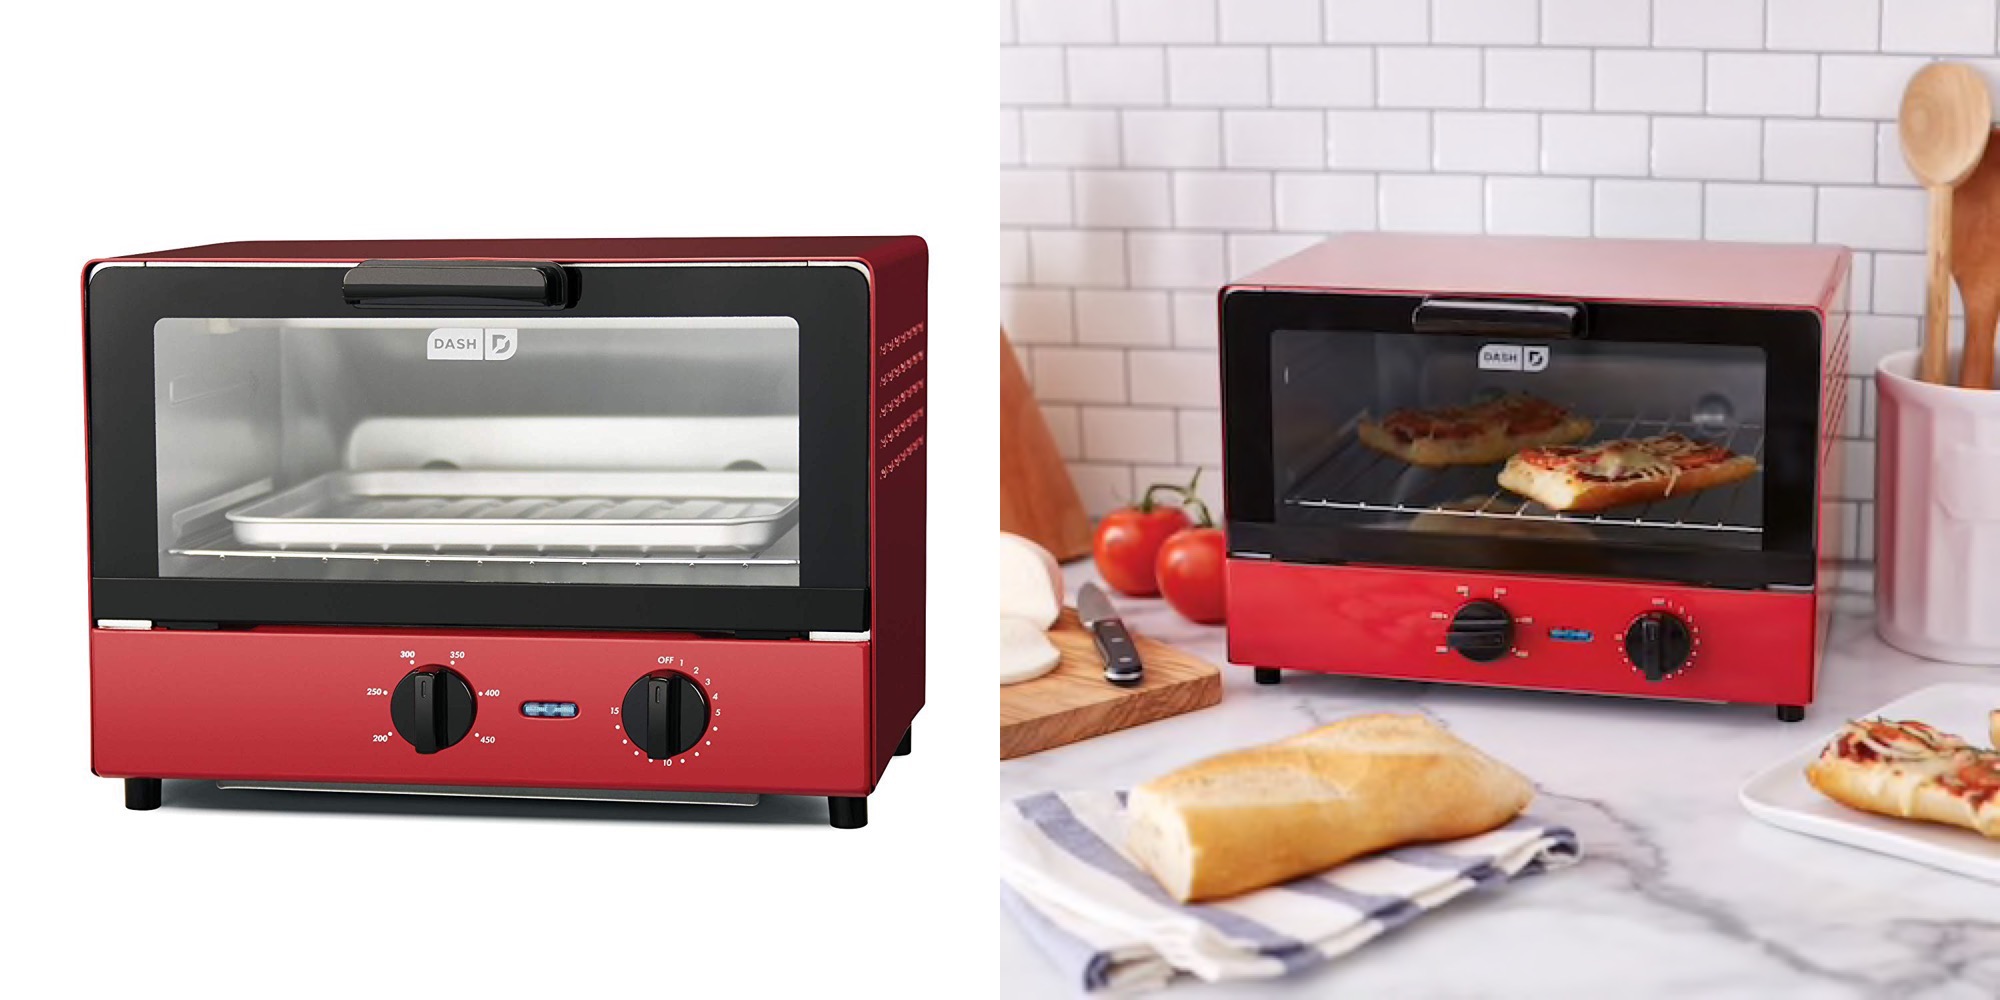 Dash's Compact Toaster Oven is available at  for a low of $17 shipped  (Reg. $30)